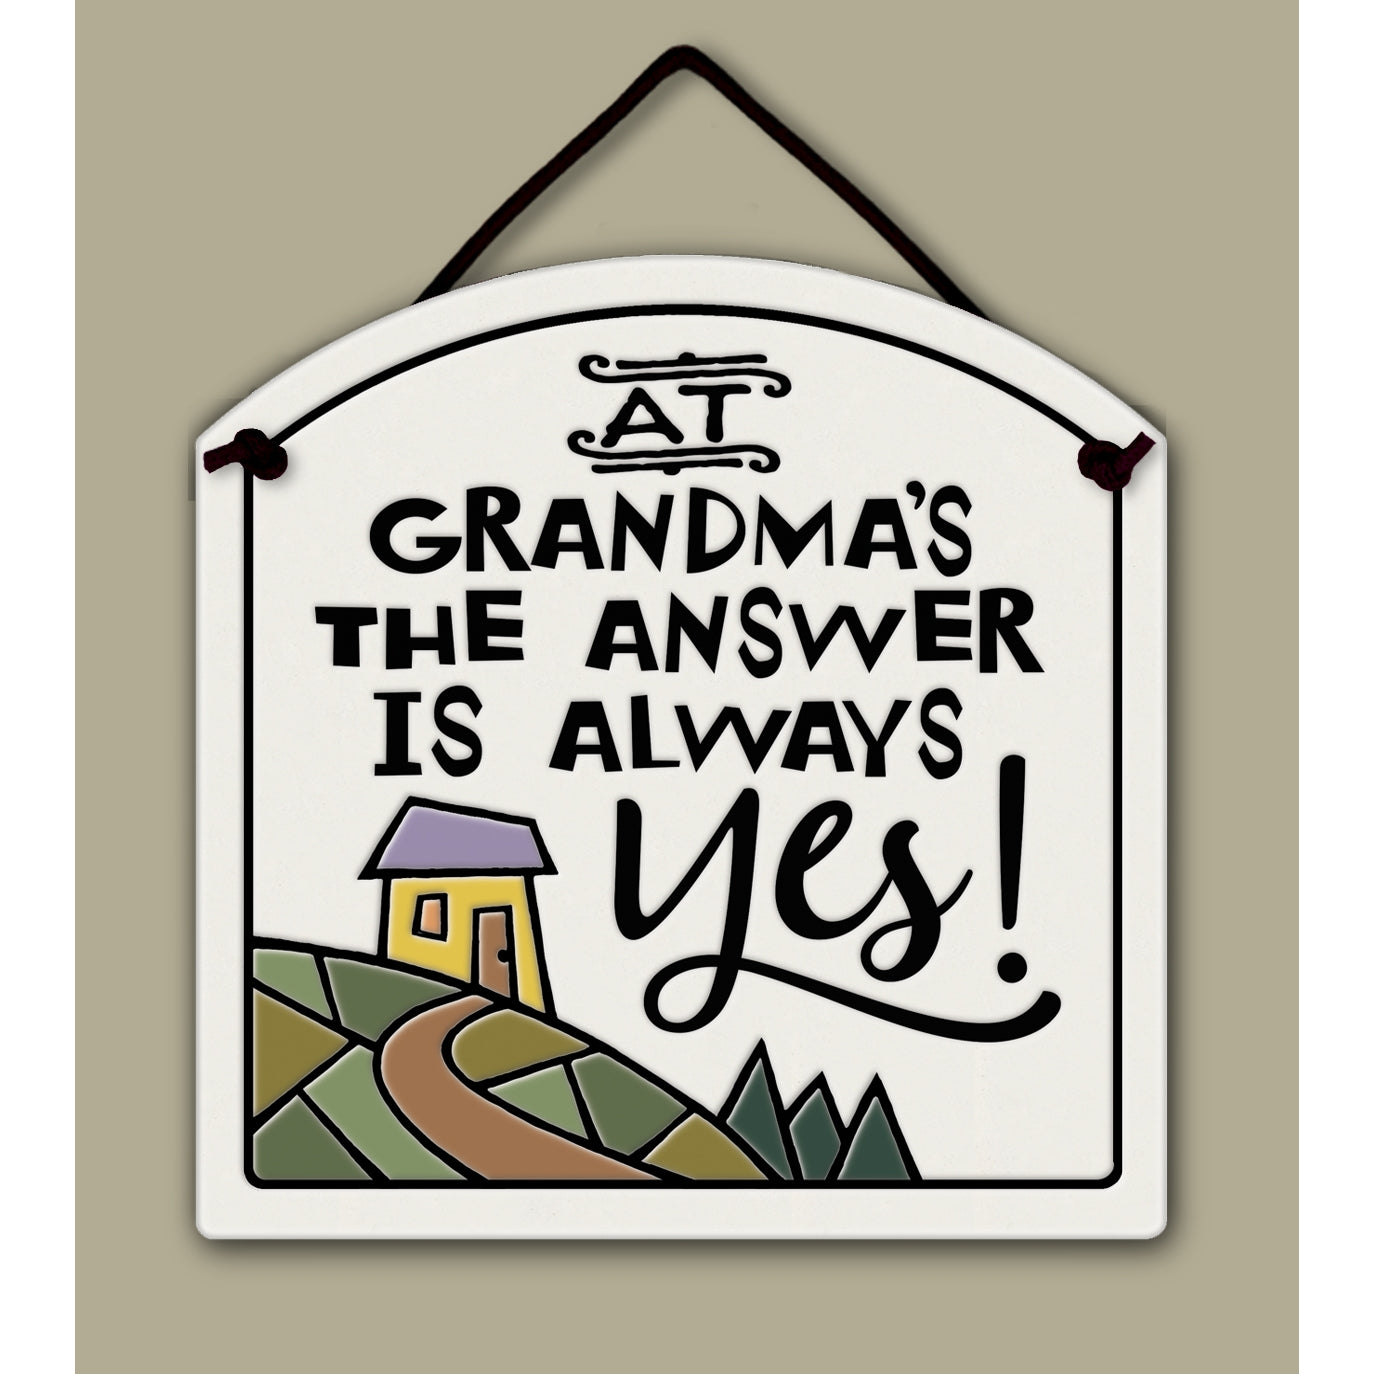 "At Grandma's the answer is always yes!" Stoneware Plaque